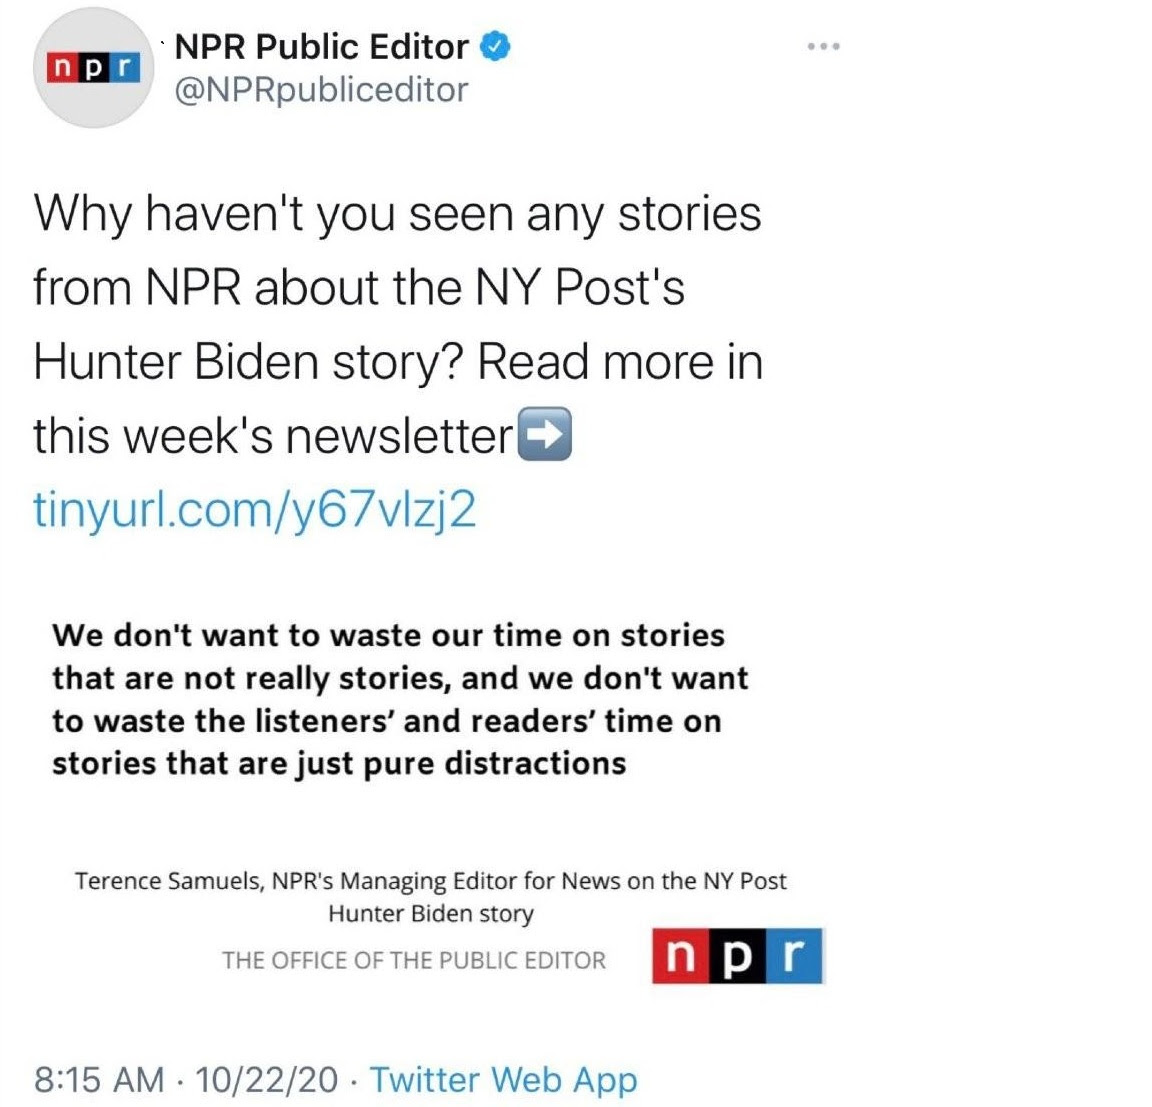 Screenshot of NPR twitter feed where they c;laim Hunter Biden laptop story is unimportant and a waste of time.